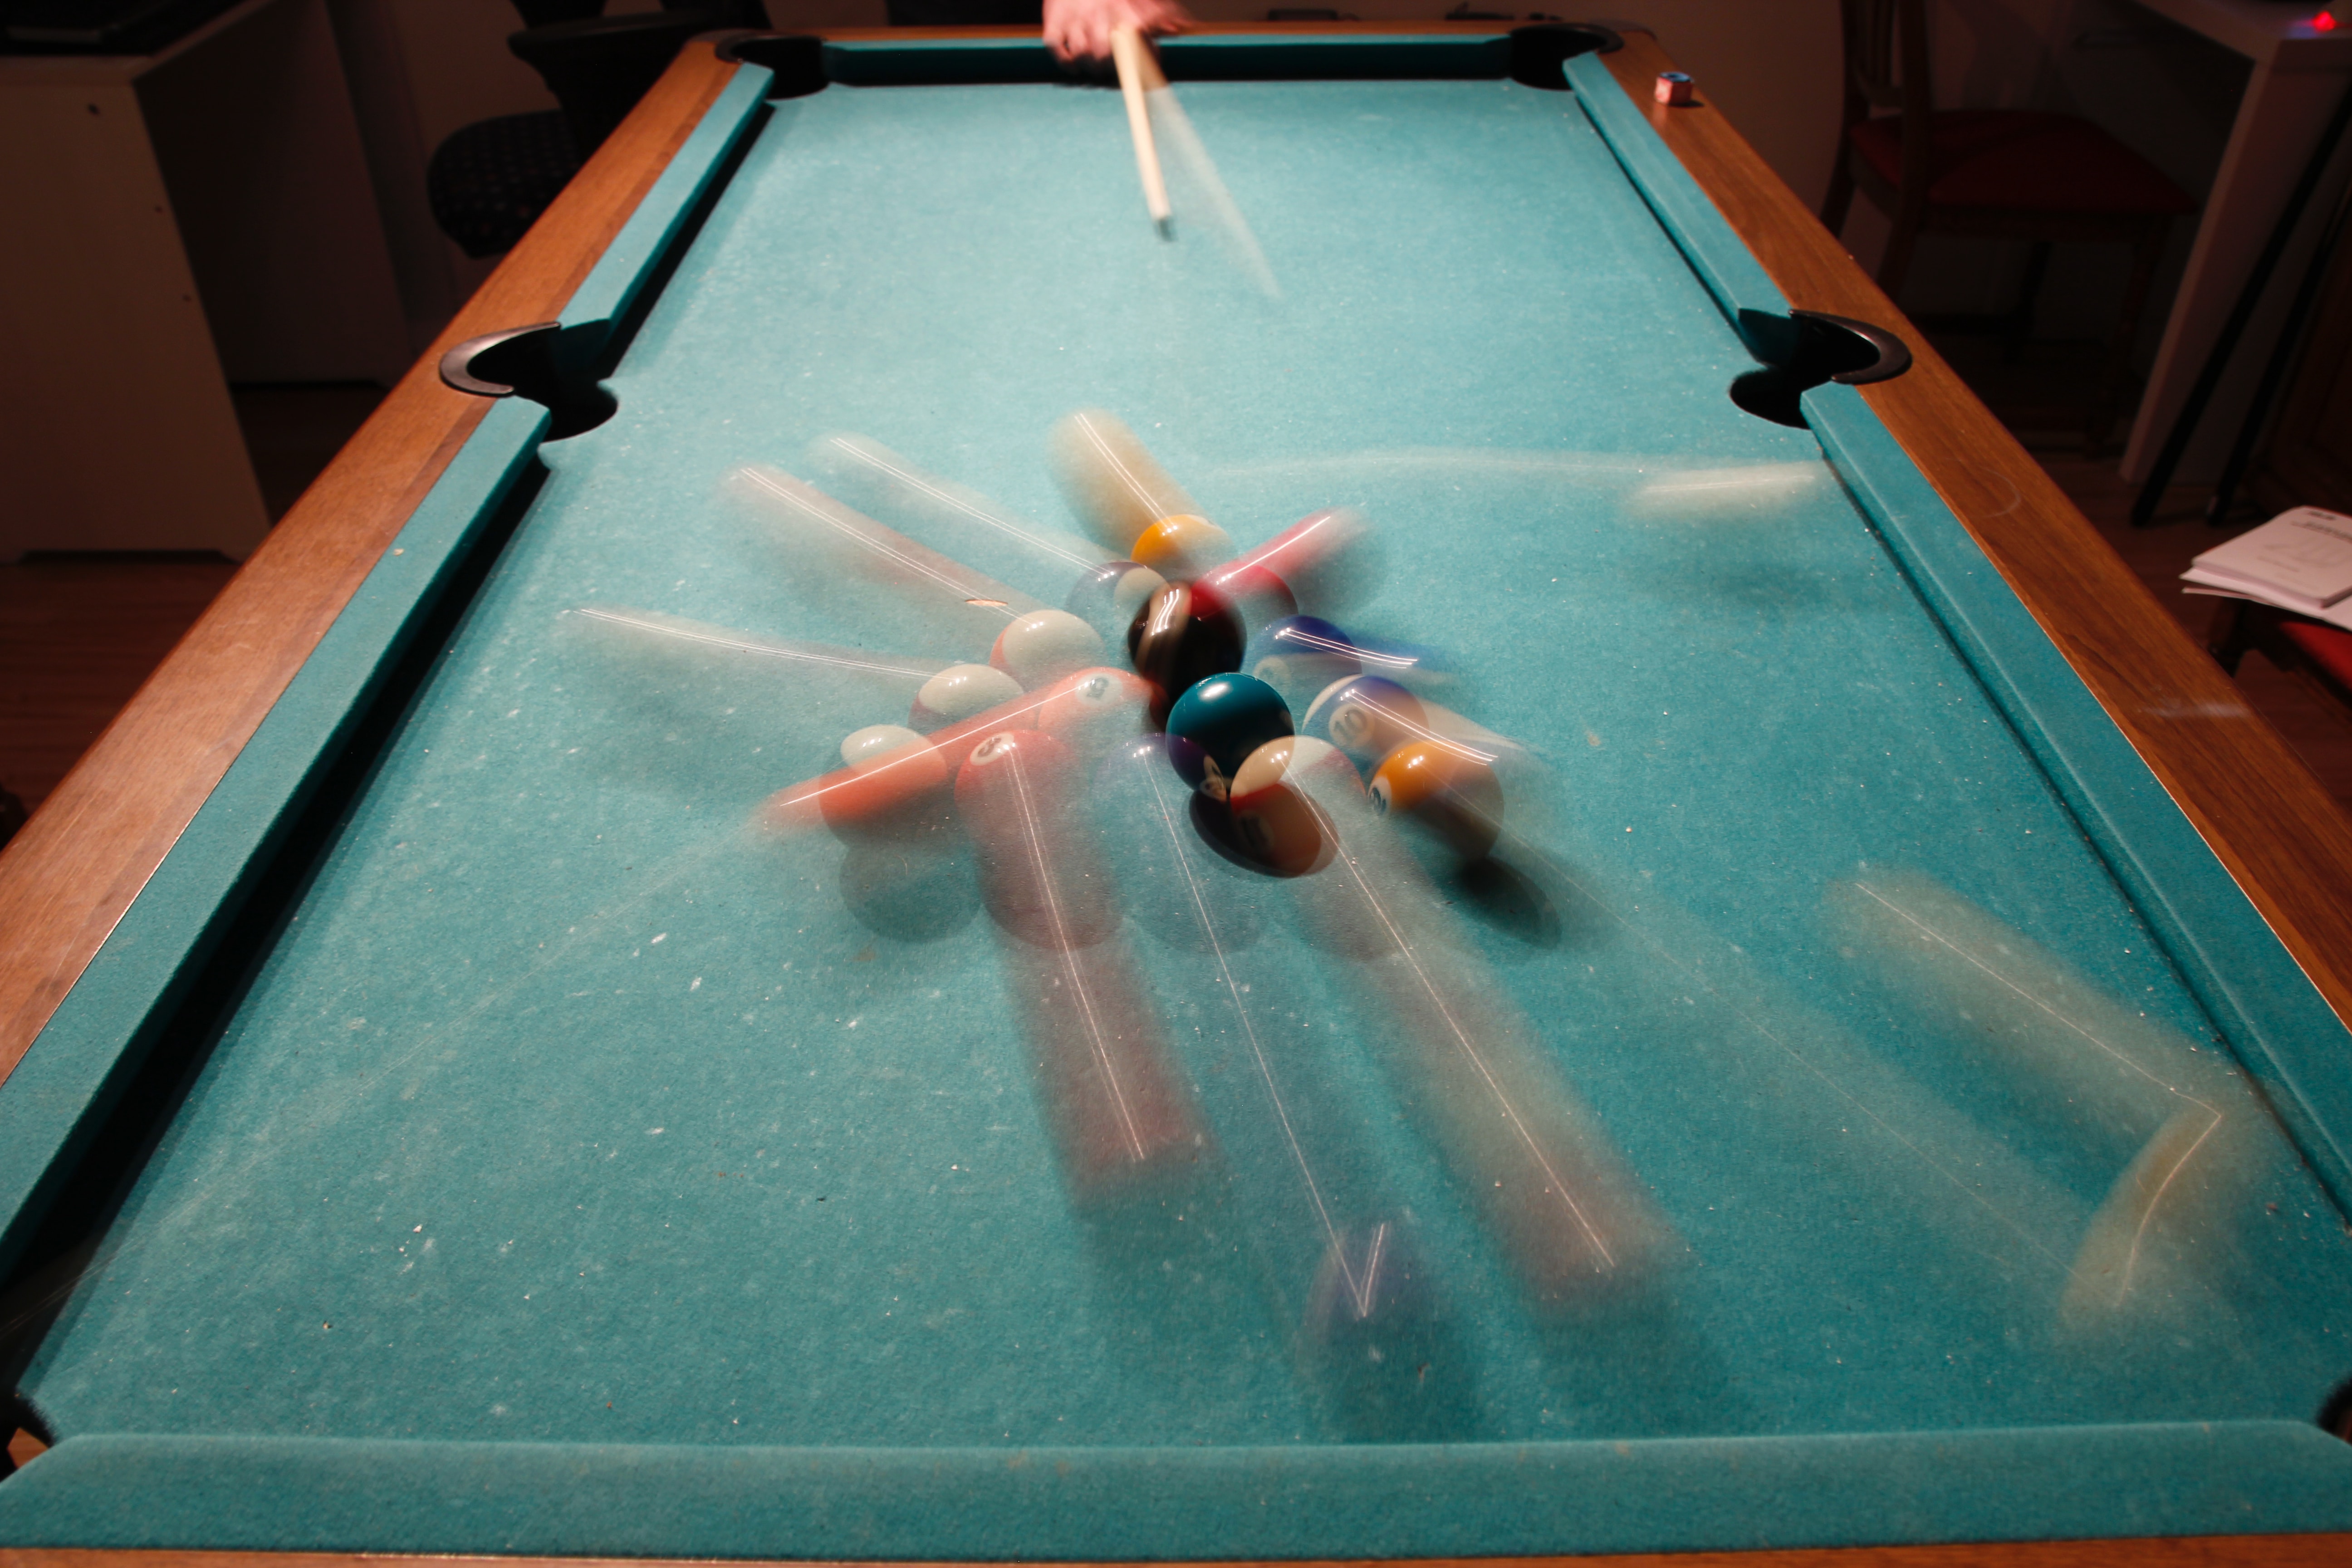 Time lapse photo of billiard balls on a table